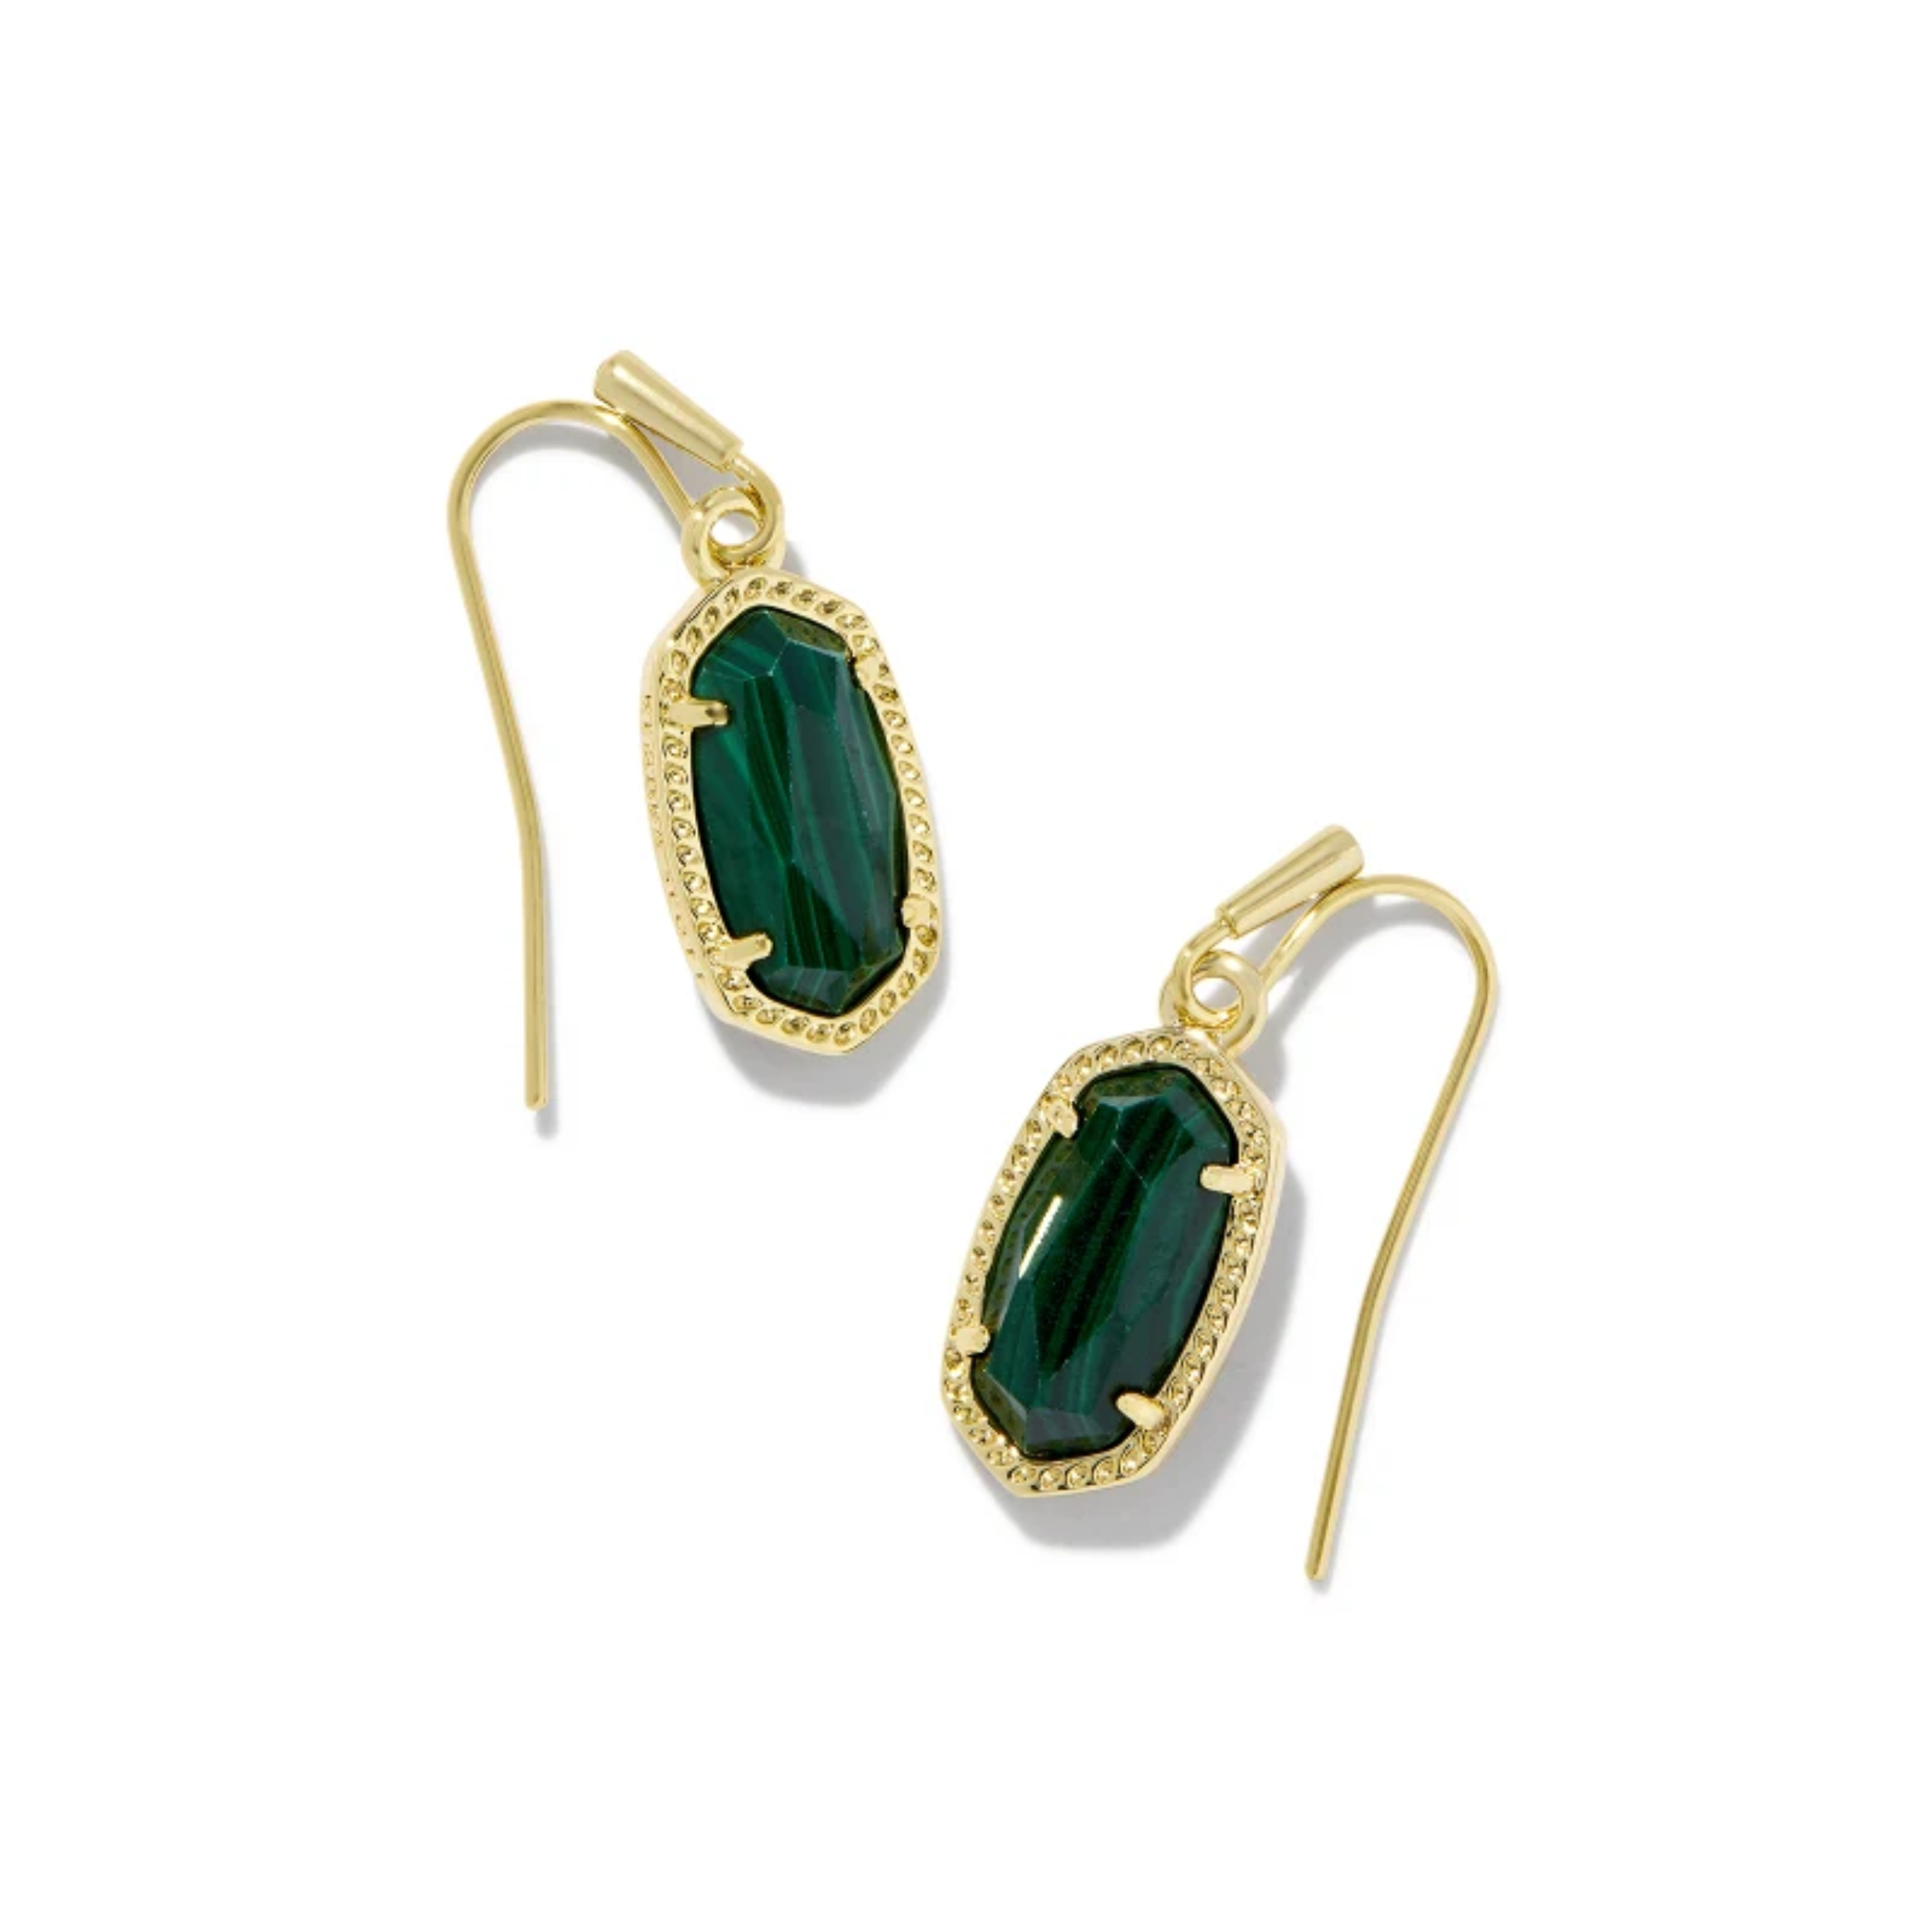 Kendra Scott | Lee Gold Earrings in Green Malachite - Giddy Up Glamour Boutique